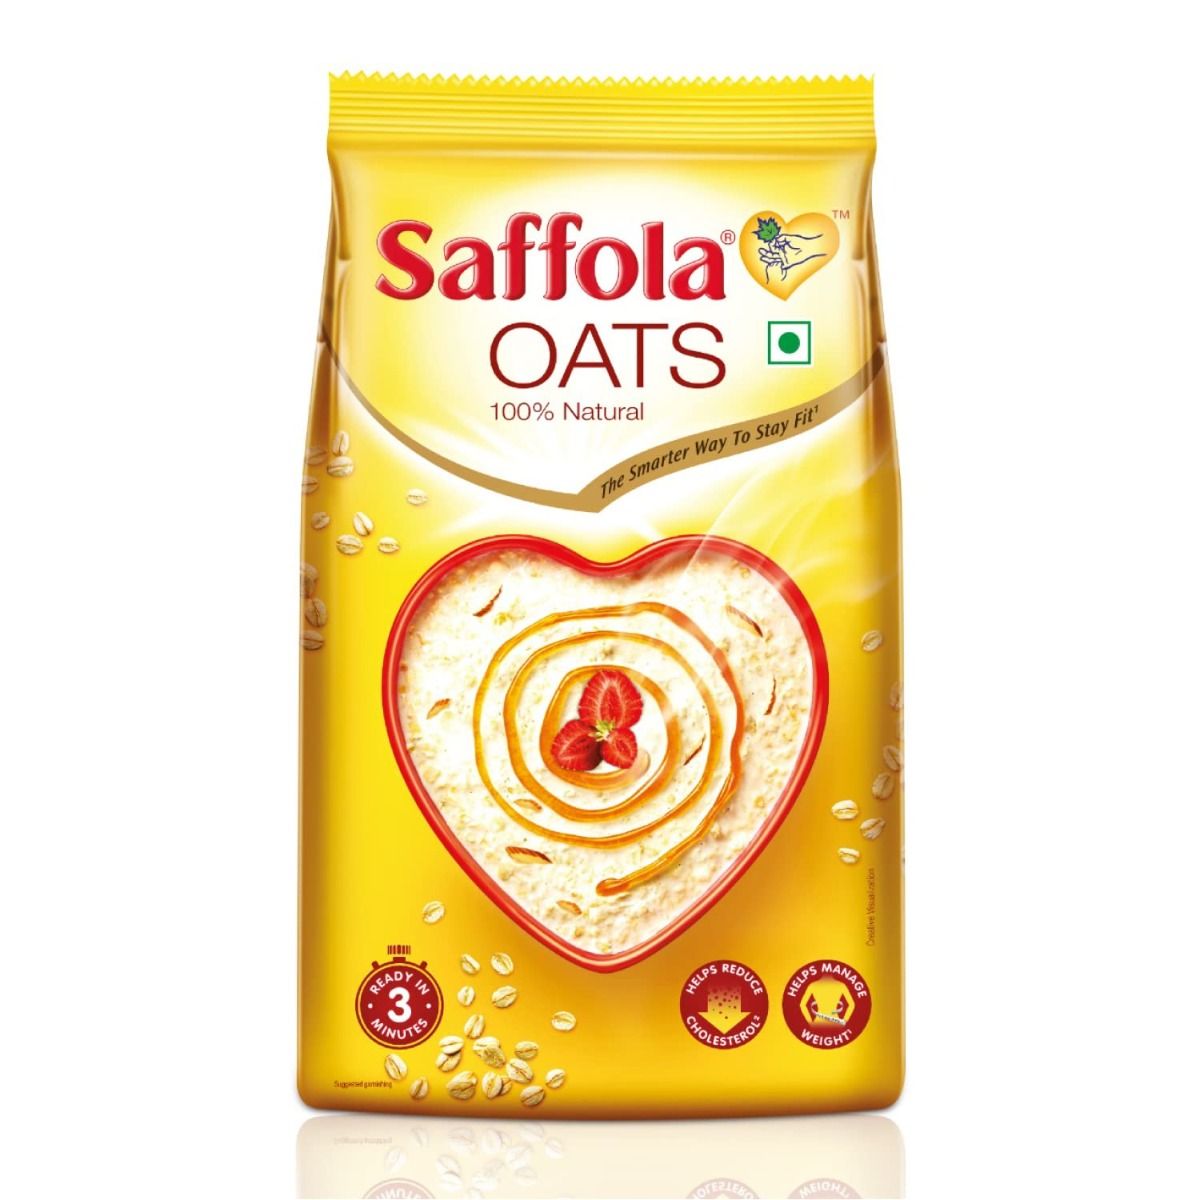 Saffola Oats, 400 gm Refill Pack, Pack of 1 